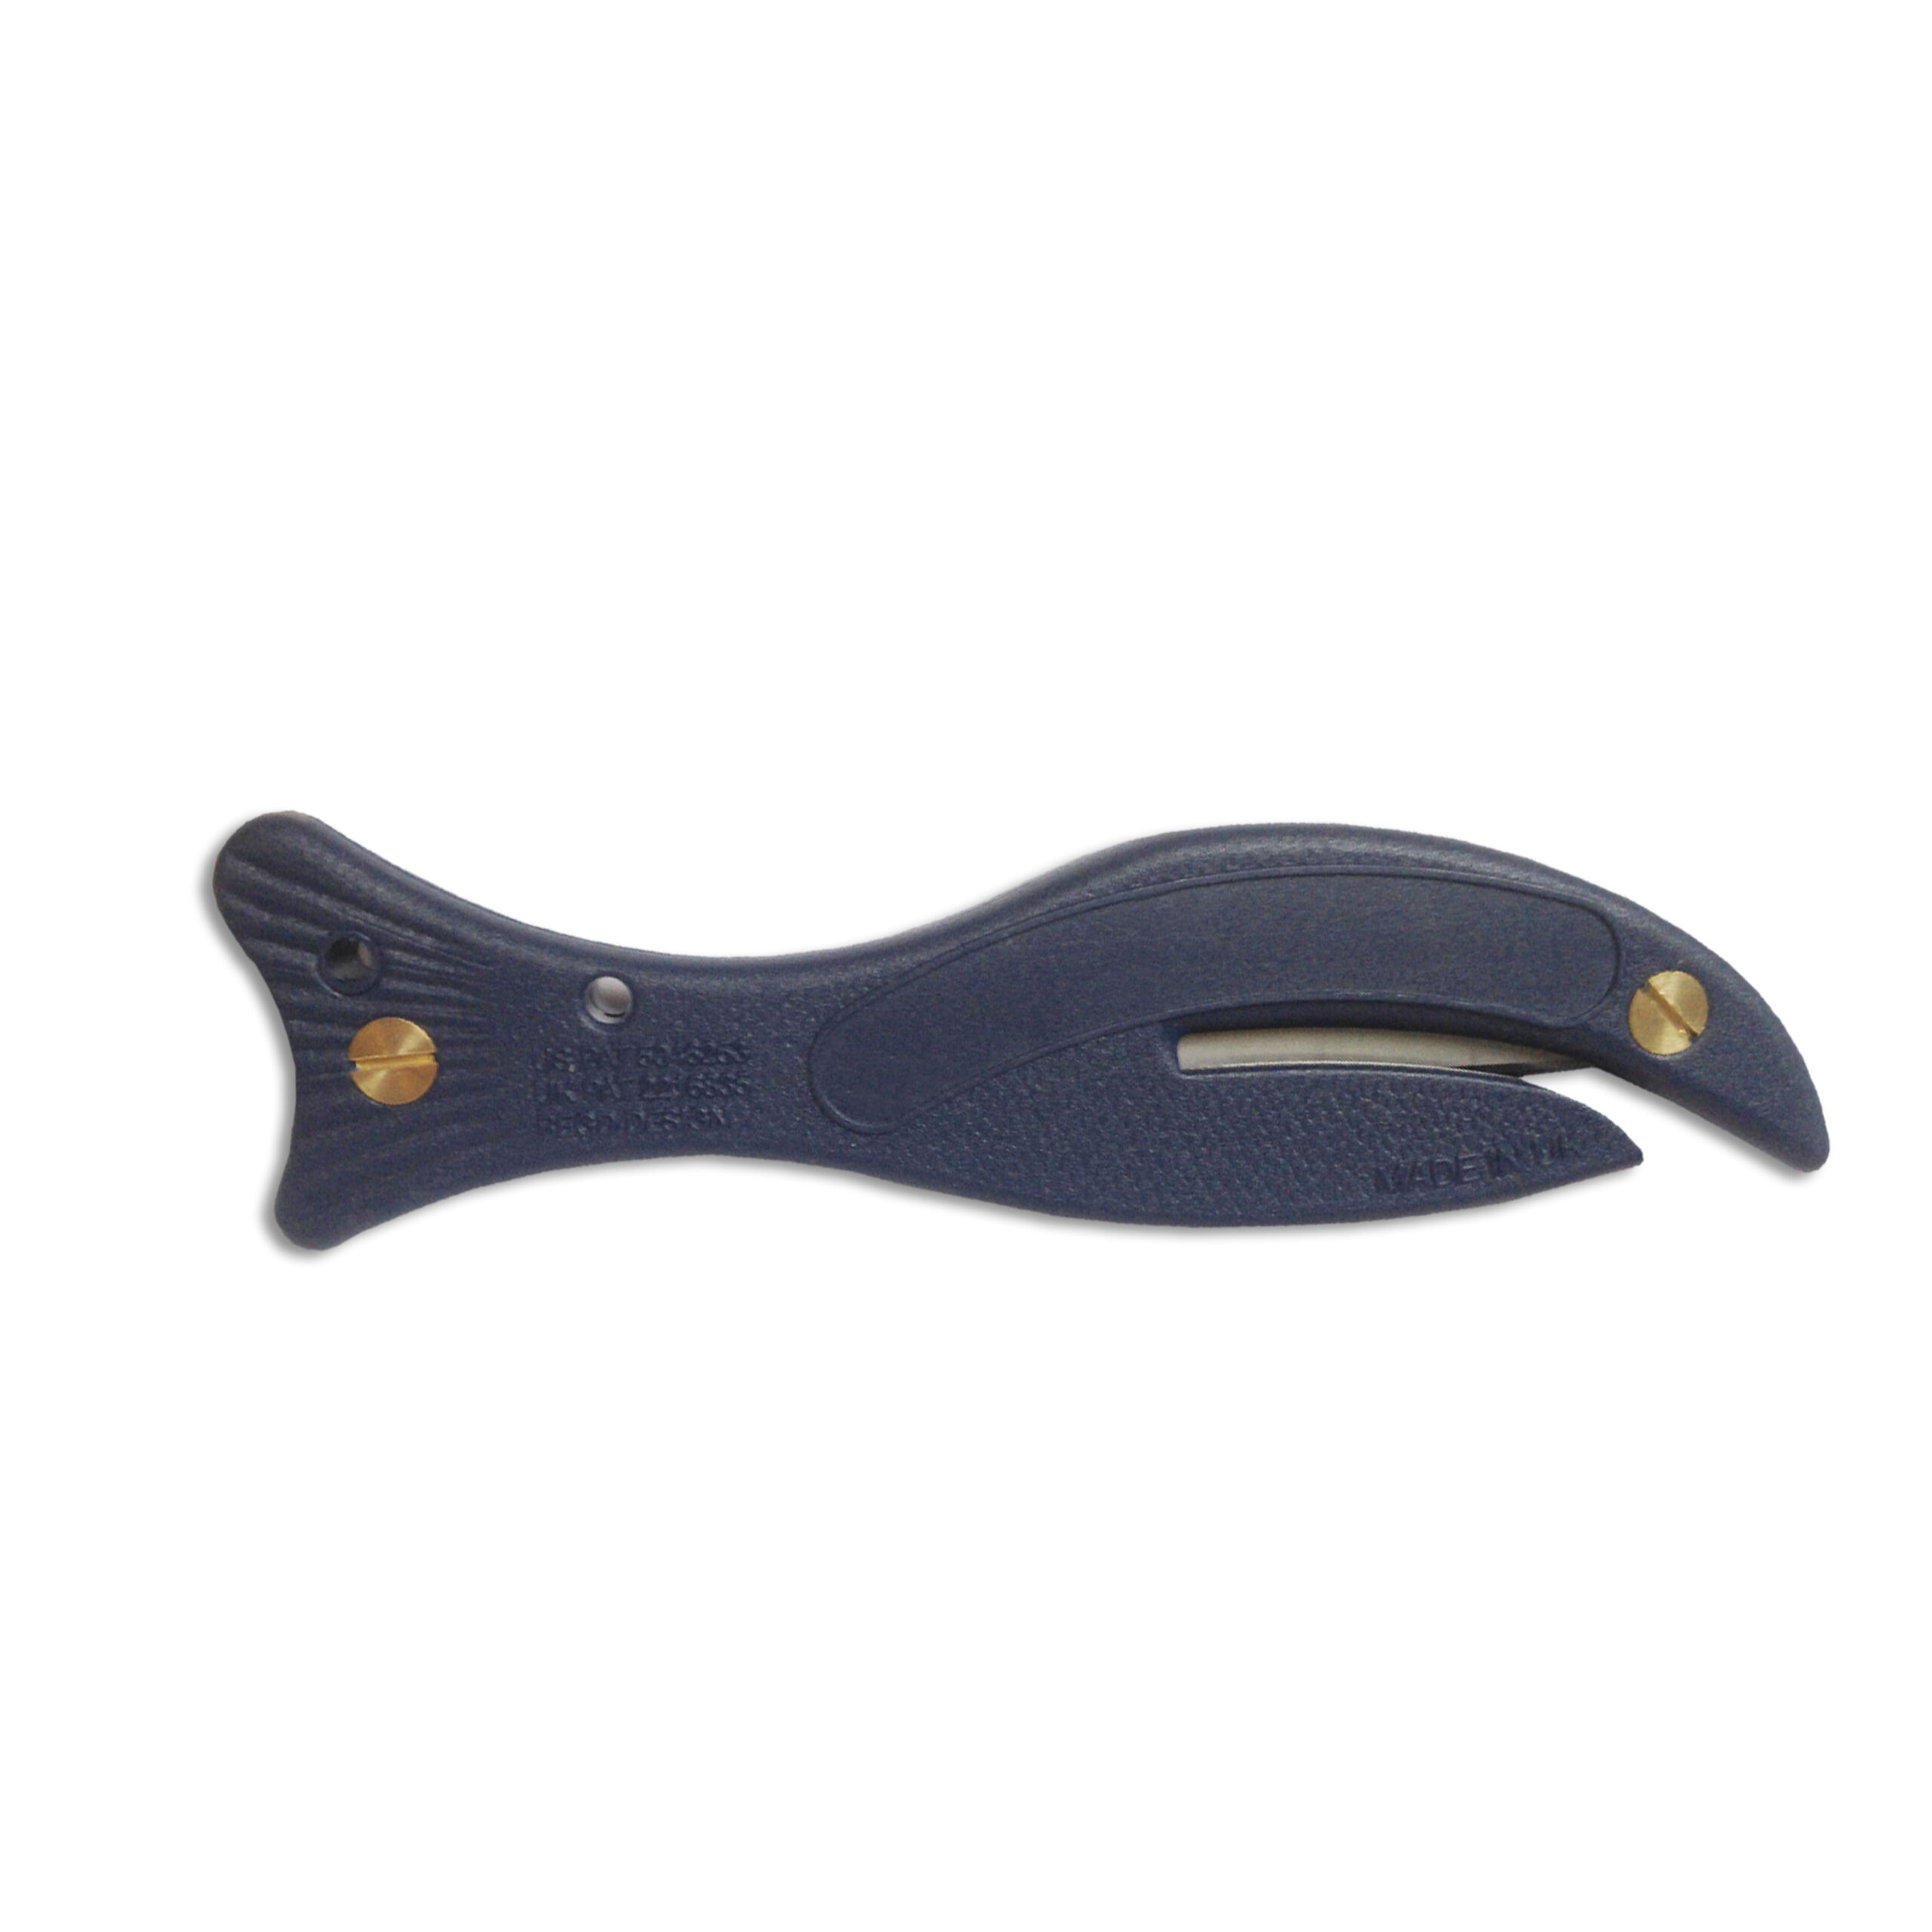 Metal Detectable Safety Knife Fish 200 without Hook Blade 